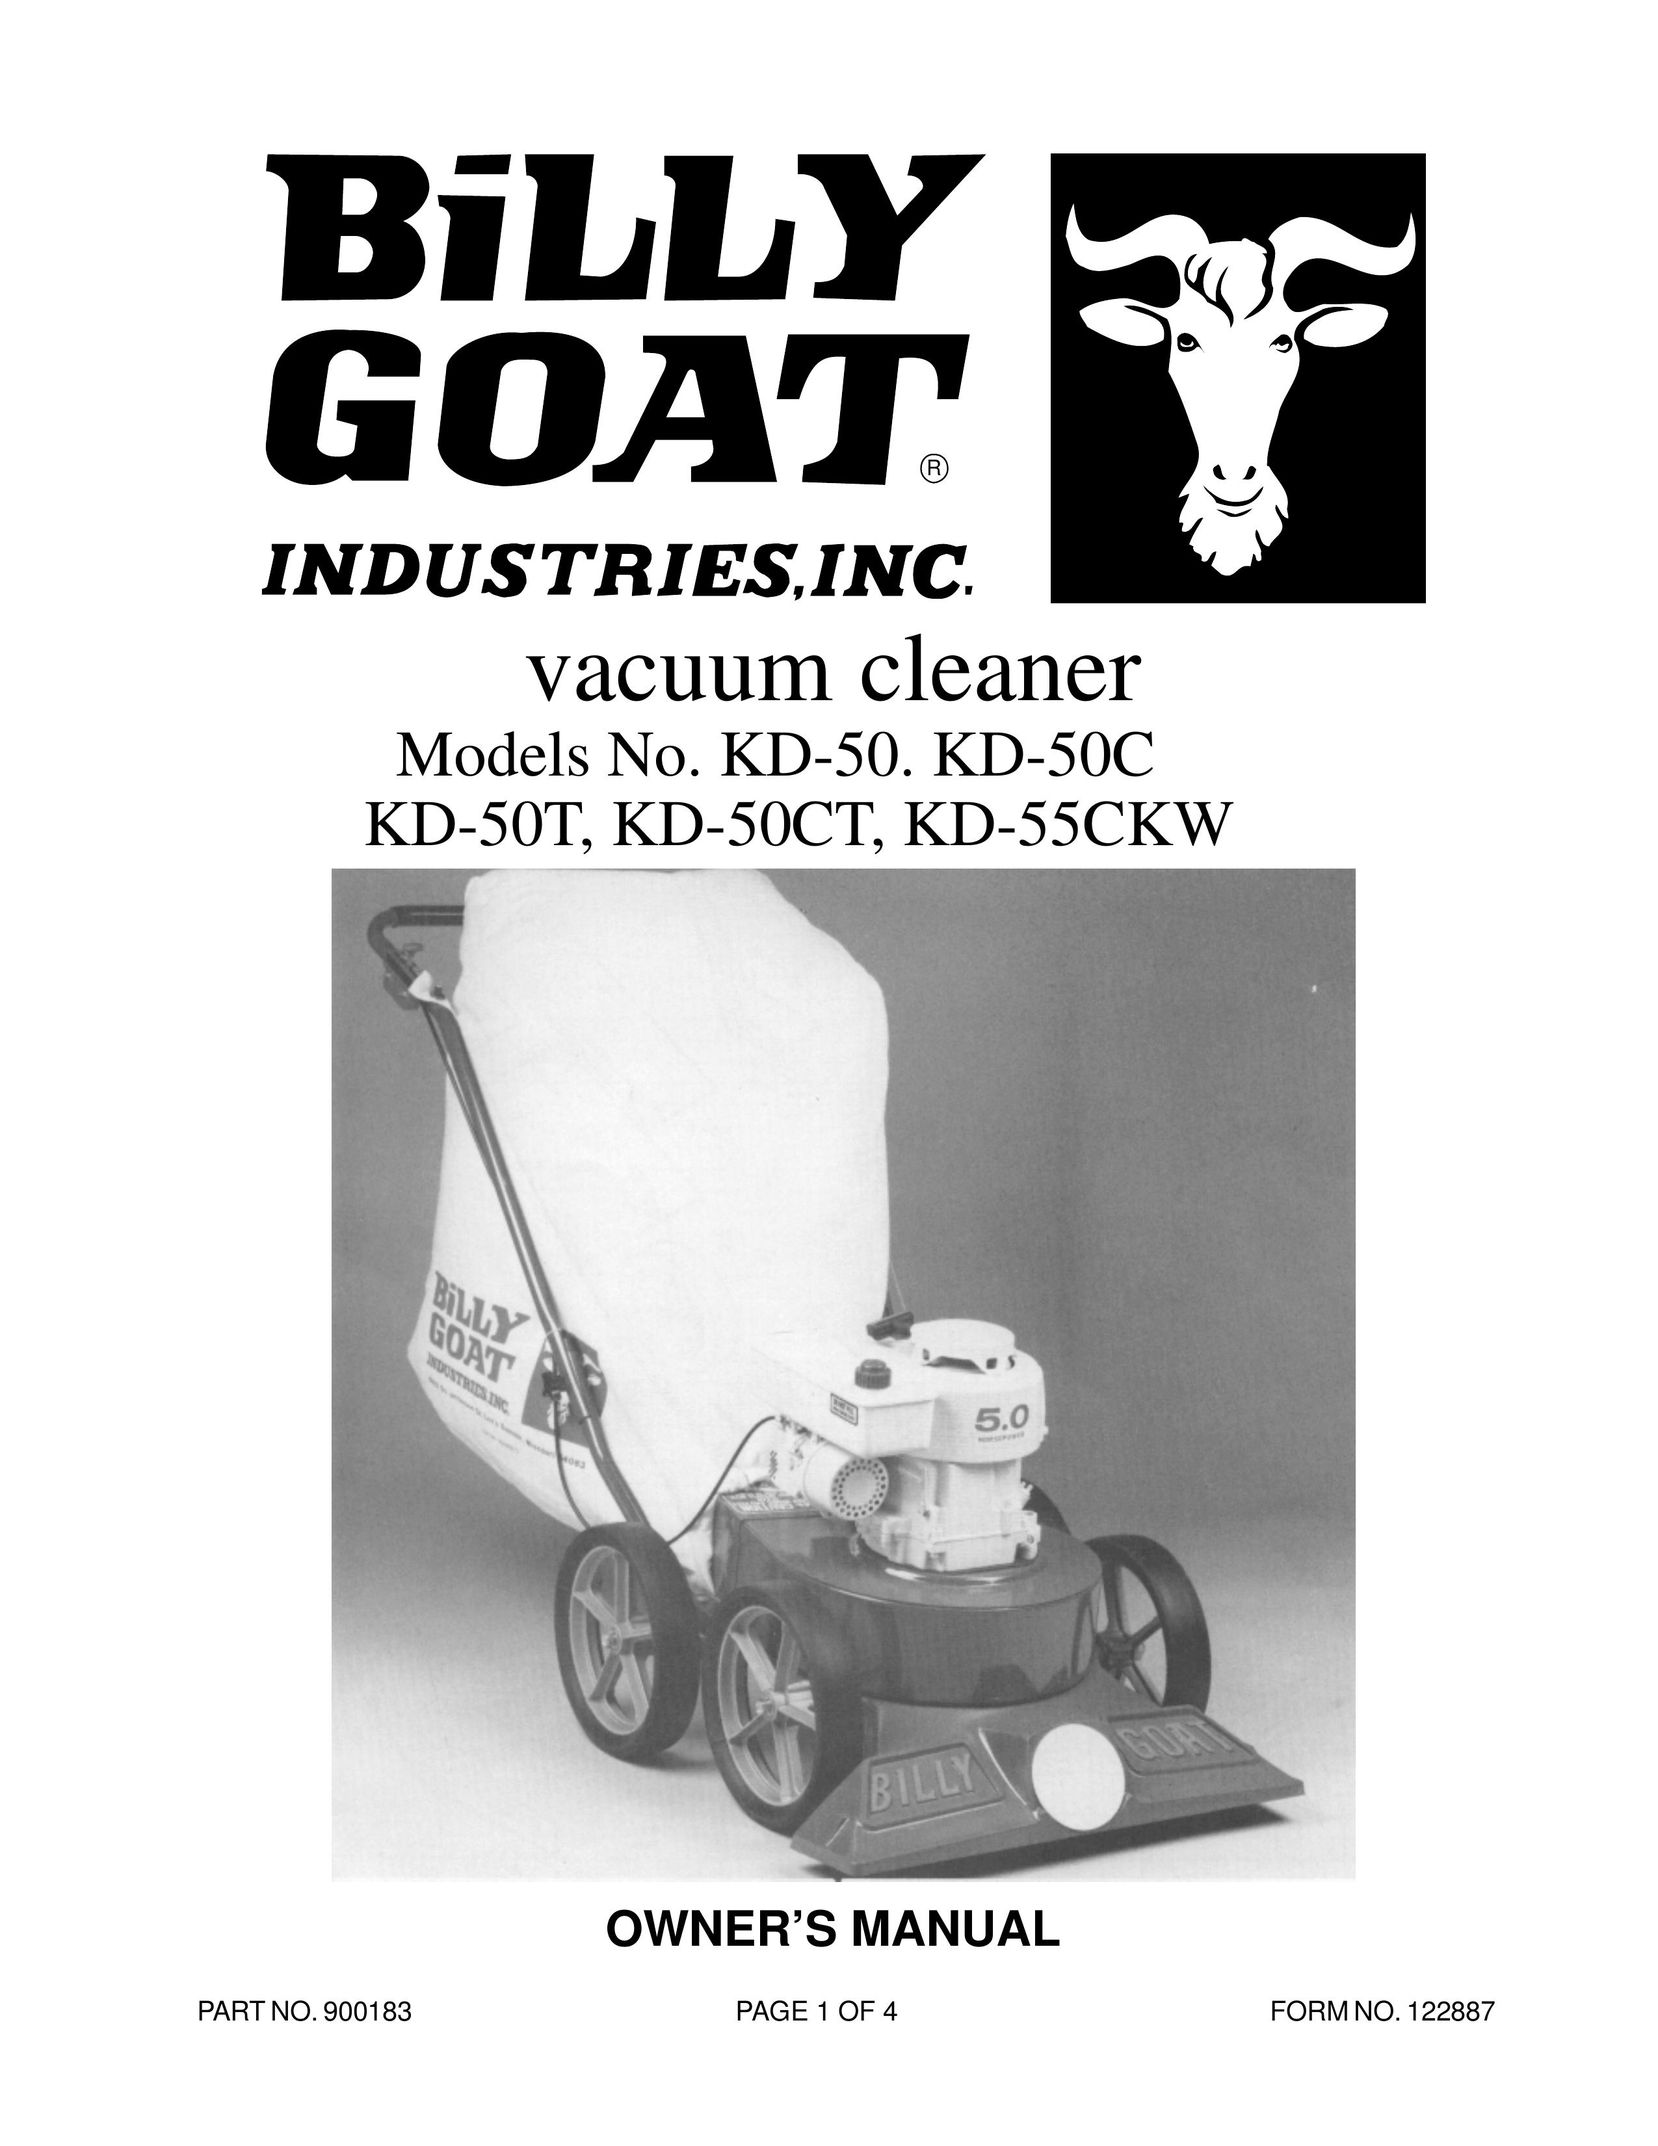 Billy Goat KD 55CKW Vacuum Cleaner User Manual